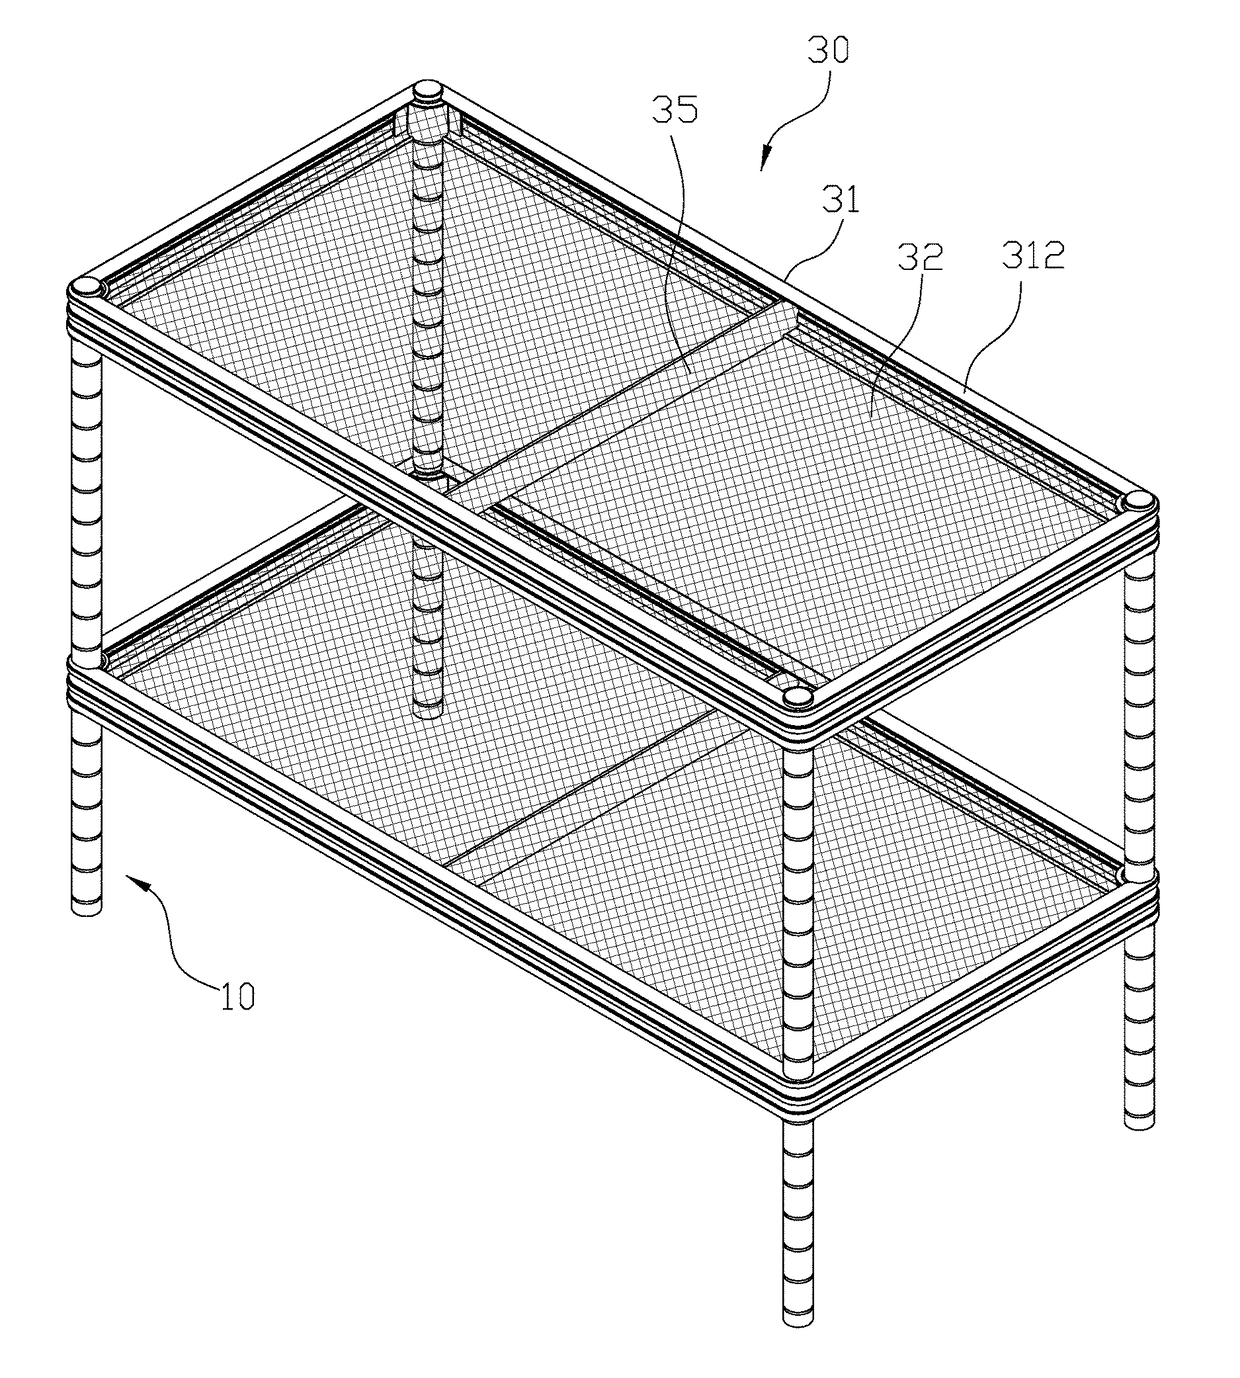 Shelving structure